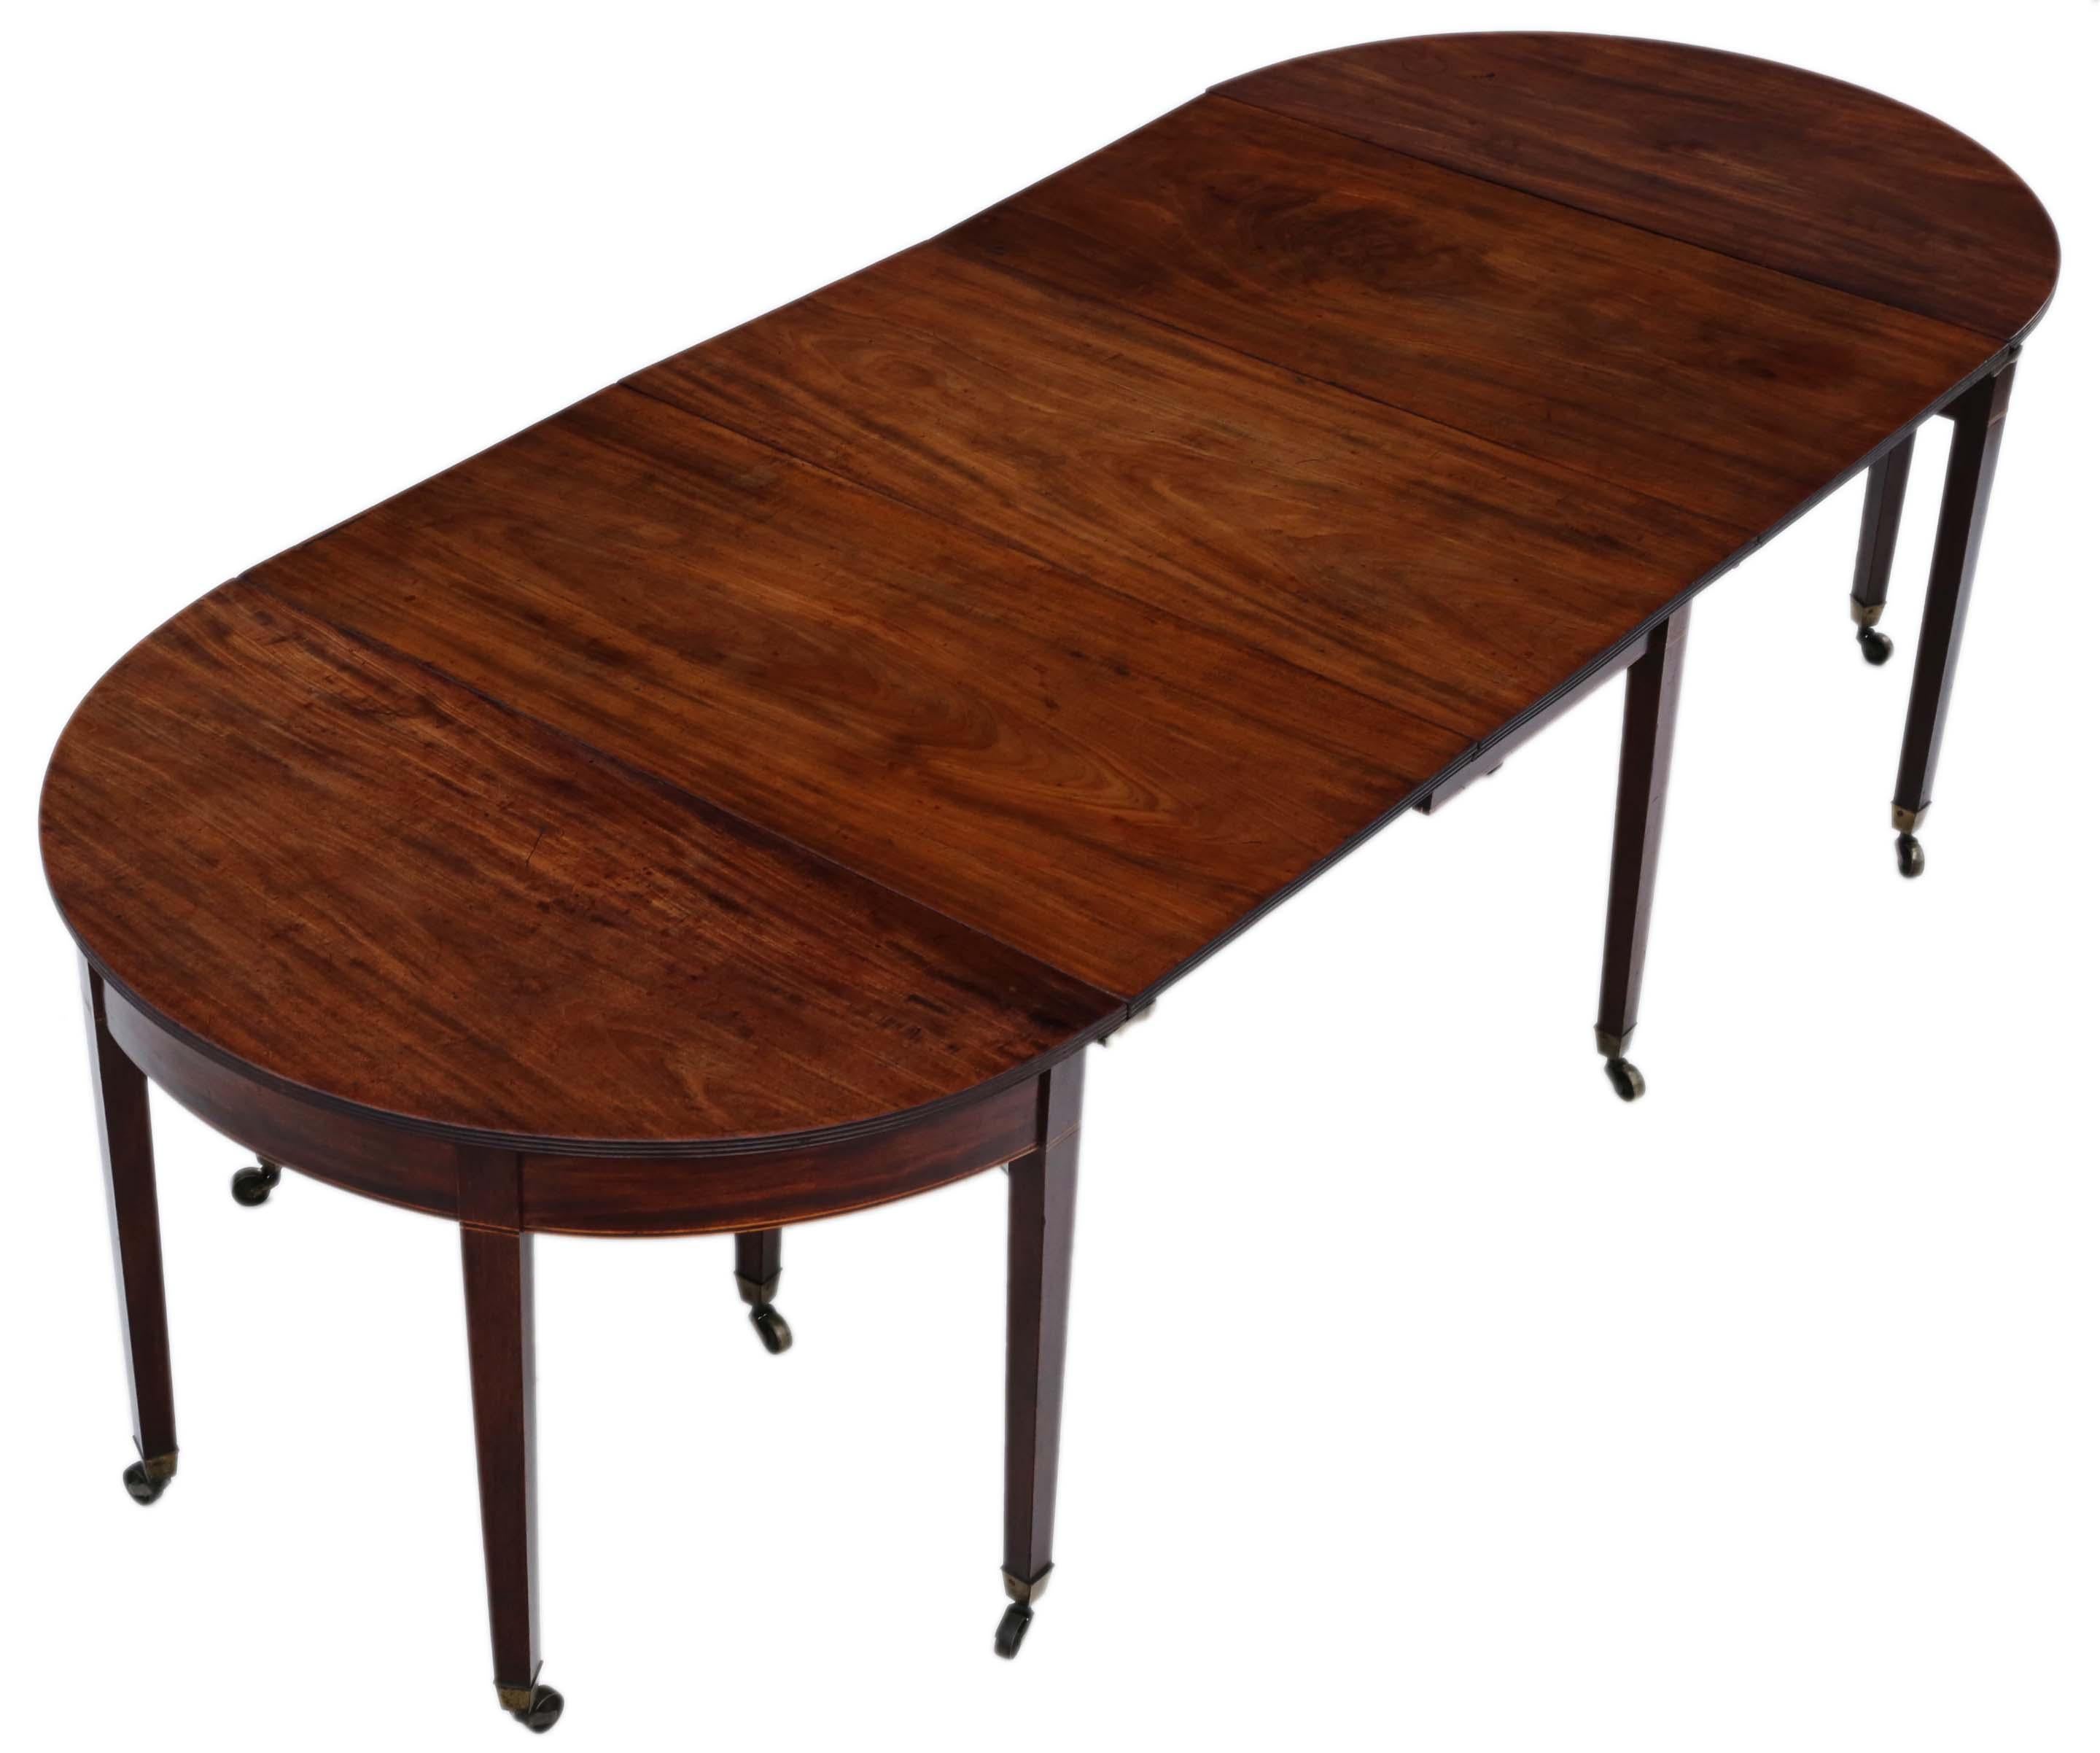 Antique very large fine quality ~9' Cuban mahogany extending dining table George III. Attractive line inlays.

A lovely fine quality table dating from circa 1800. The table has a beautifully patinated top with over 2 centuries of use and stands on